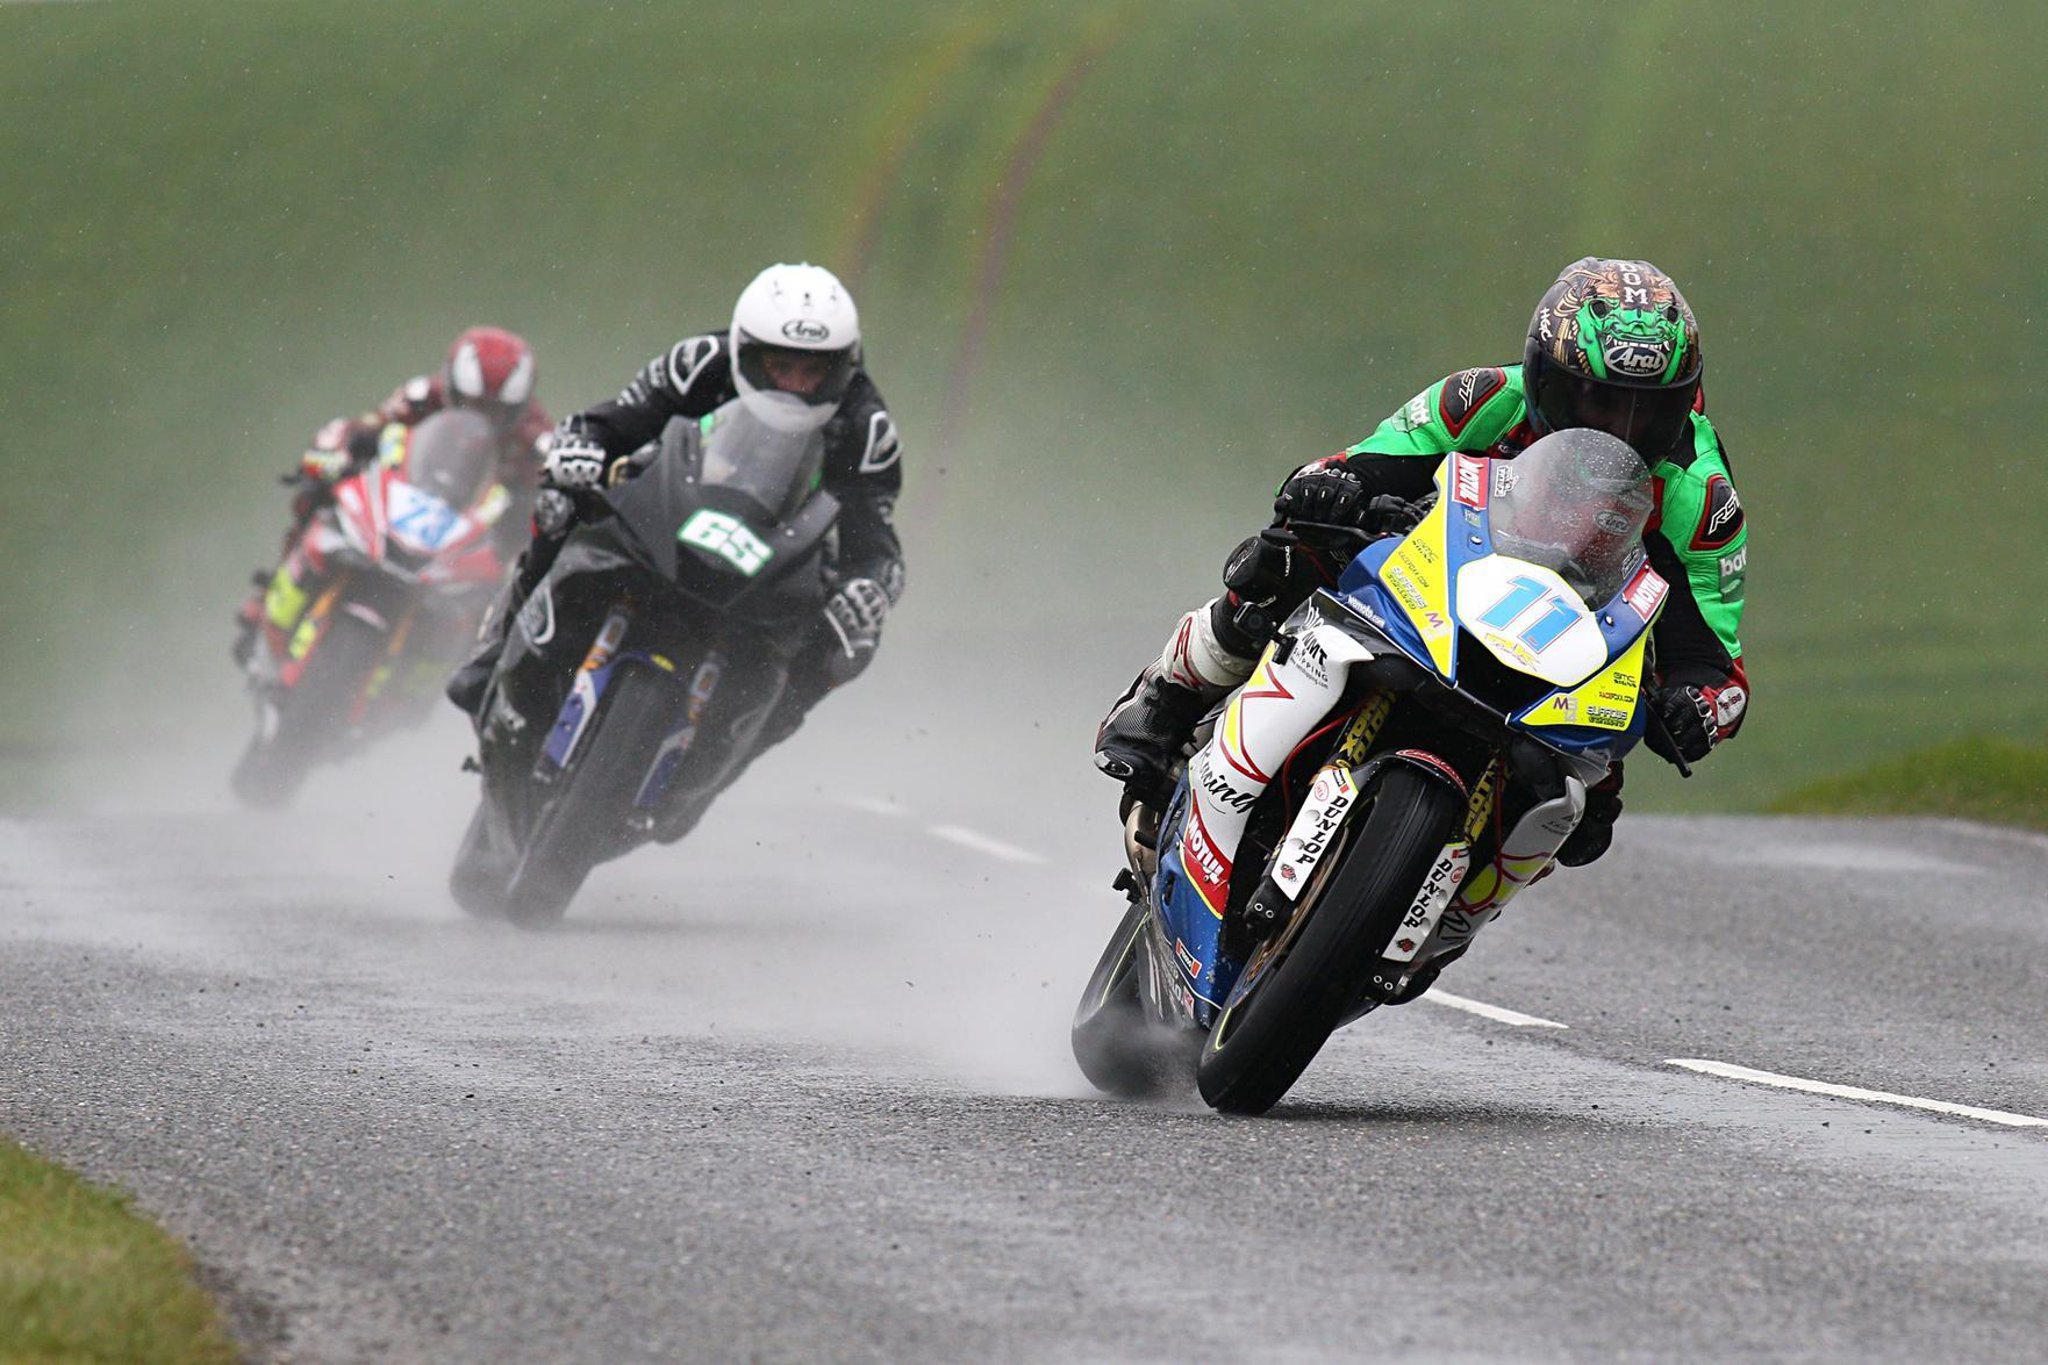 Tandragee 100 abandoned due to deteriorating conditions